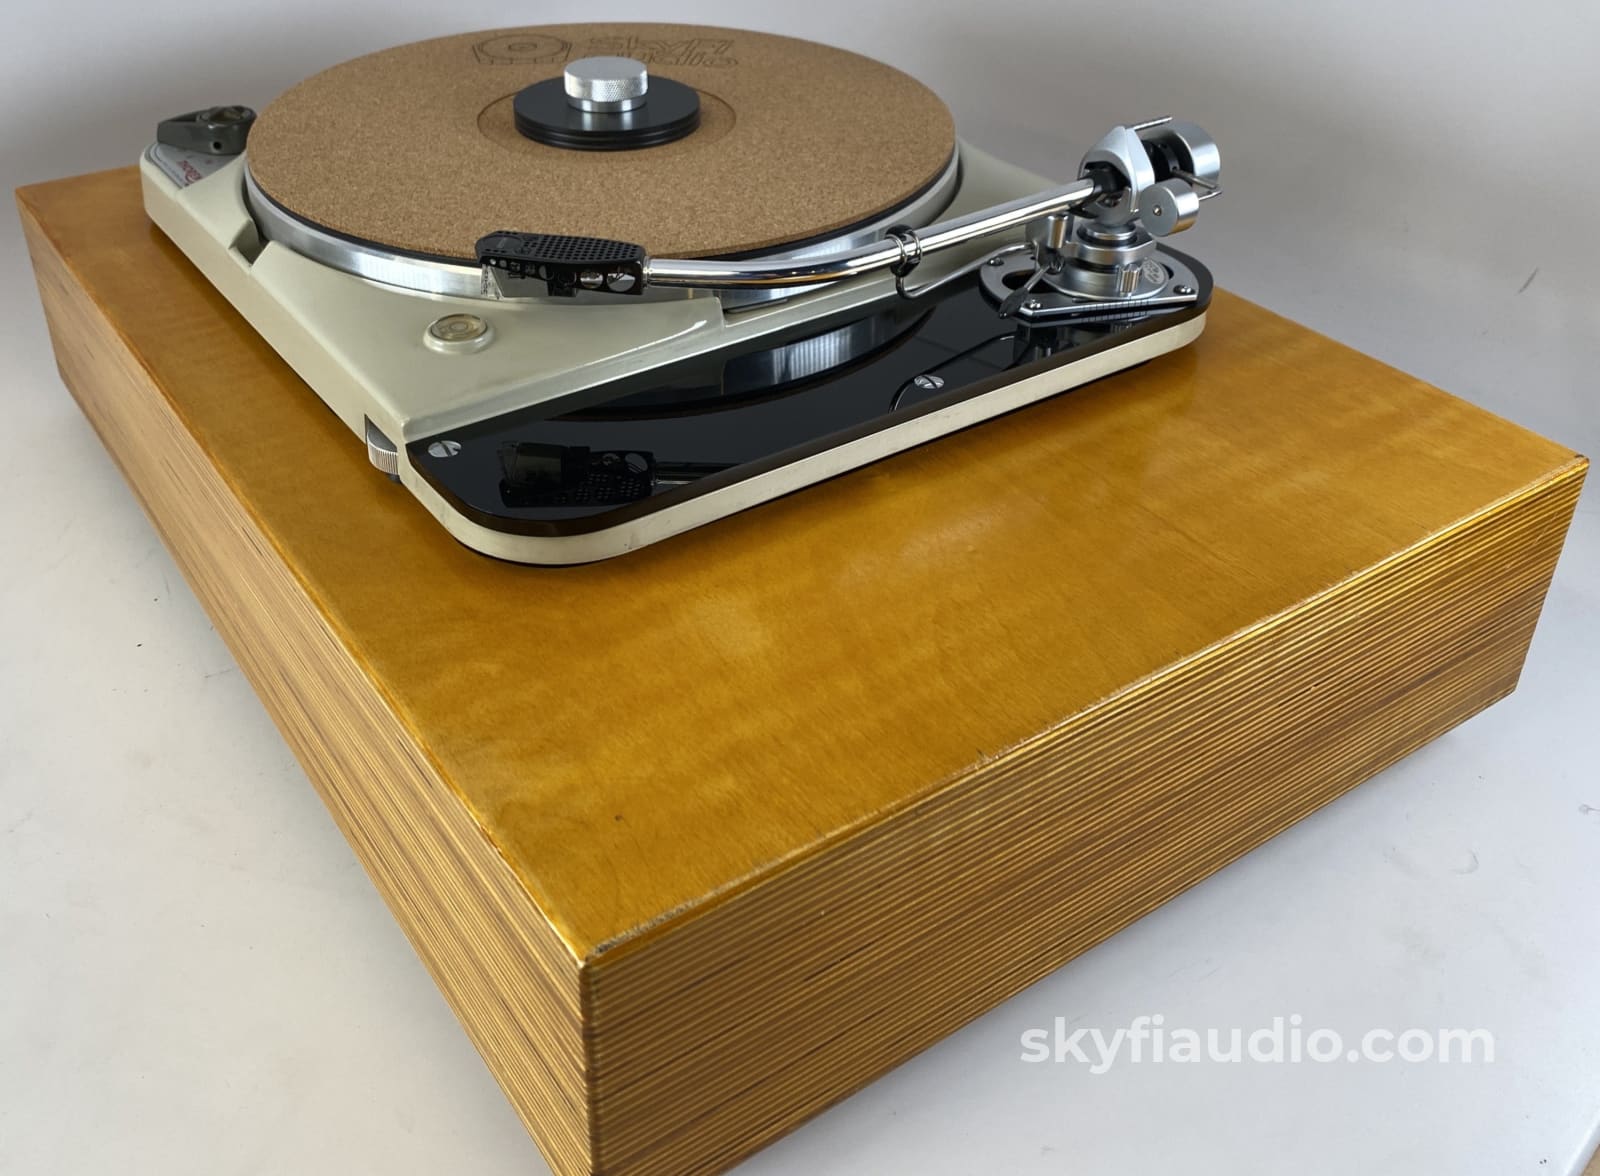 Thorens Td-124 With Custom Solid Wood Plinth And Sme3009 Tonearm Turntable